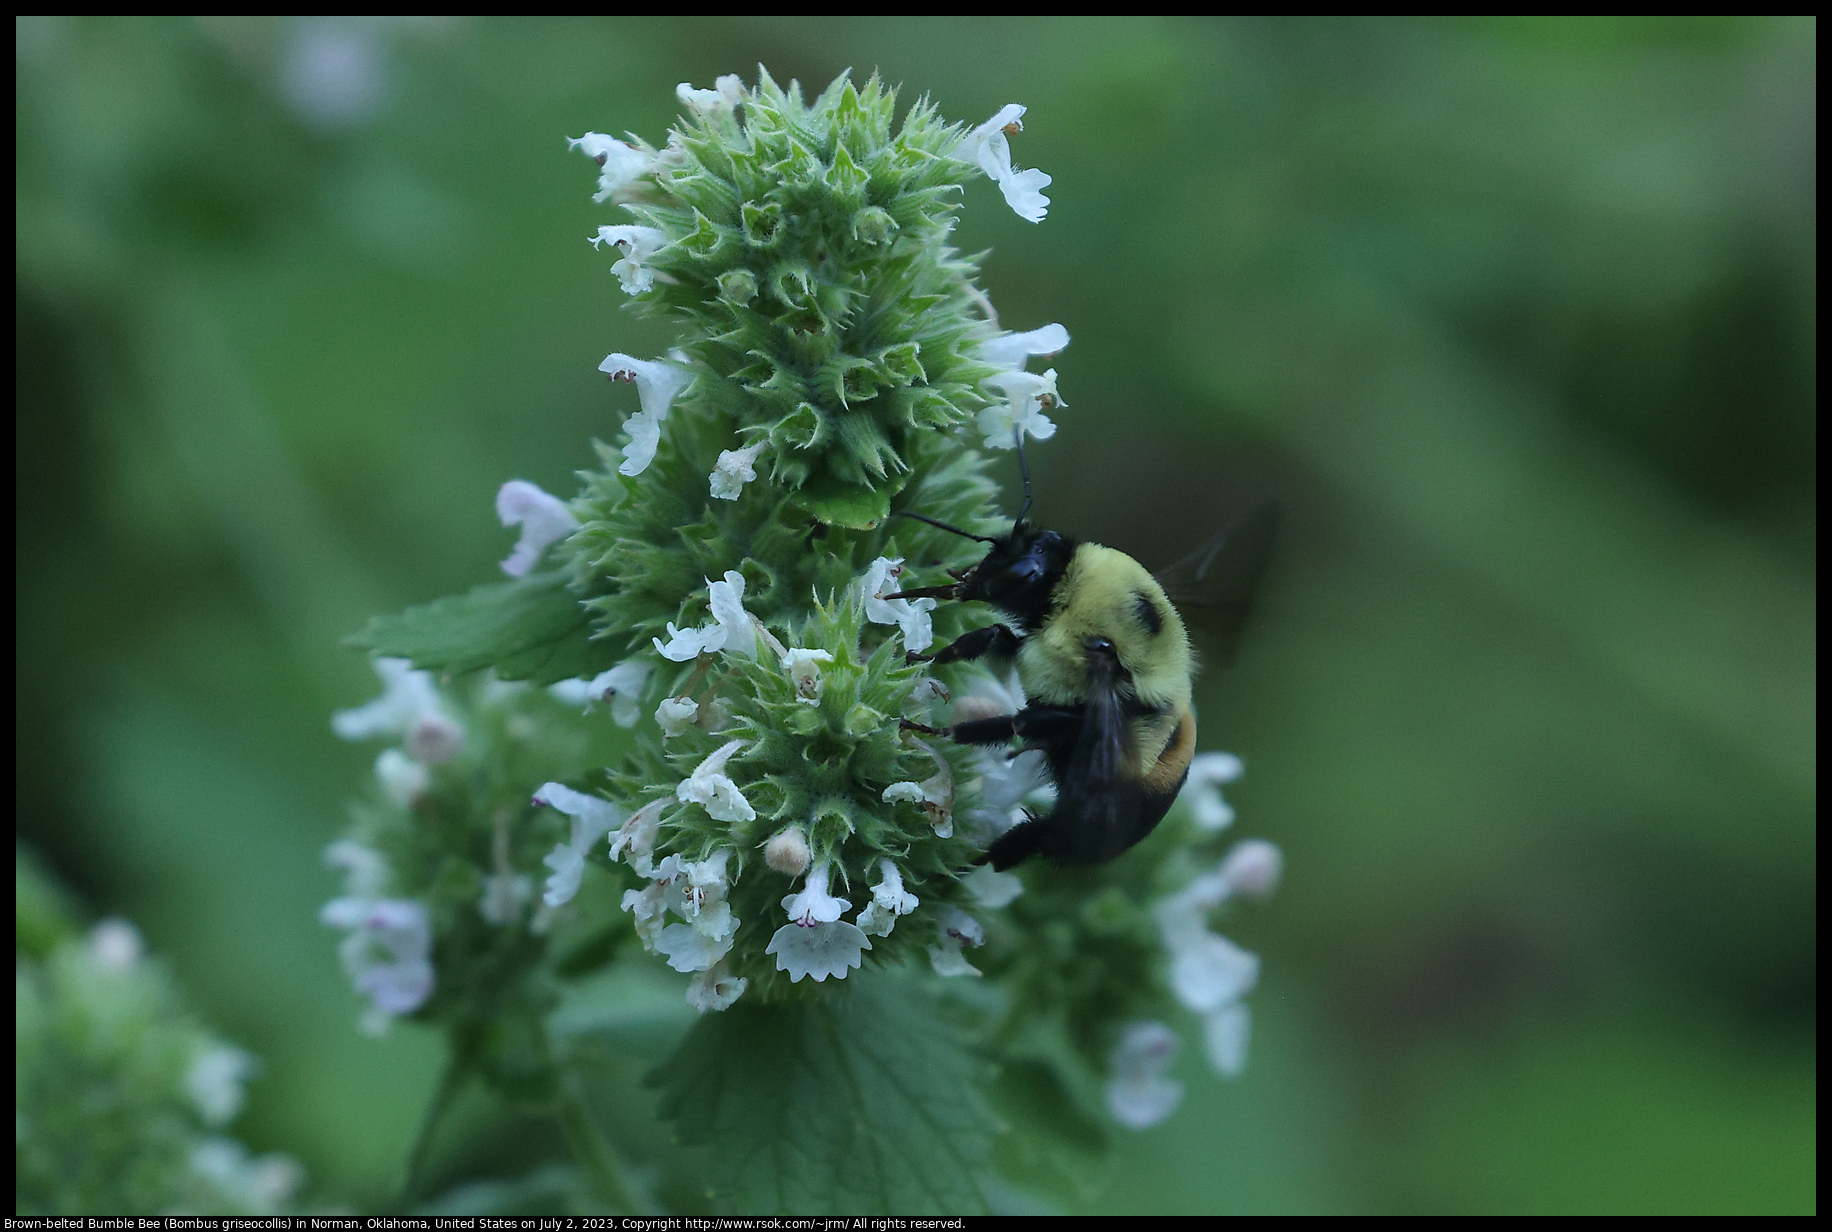 Brown-belted Bumble Bee (Bombus griseocollis) in Norman, Oklahoma, United States on July 2, 2023